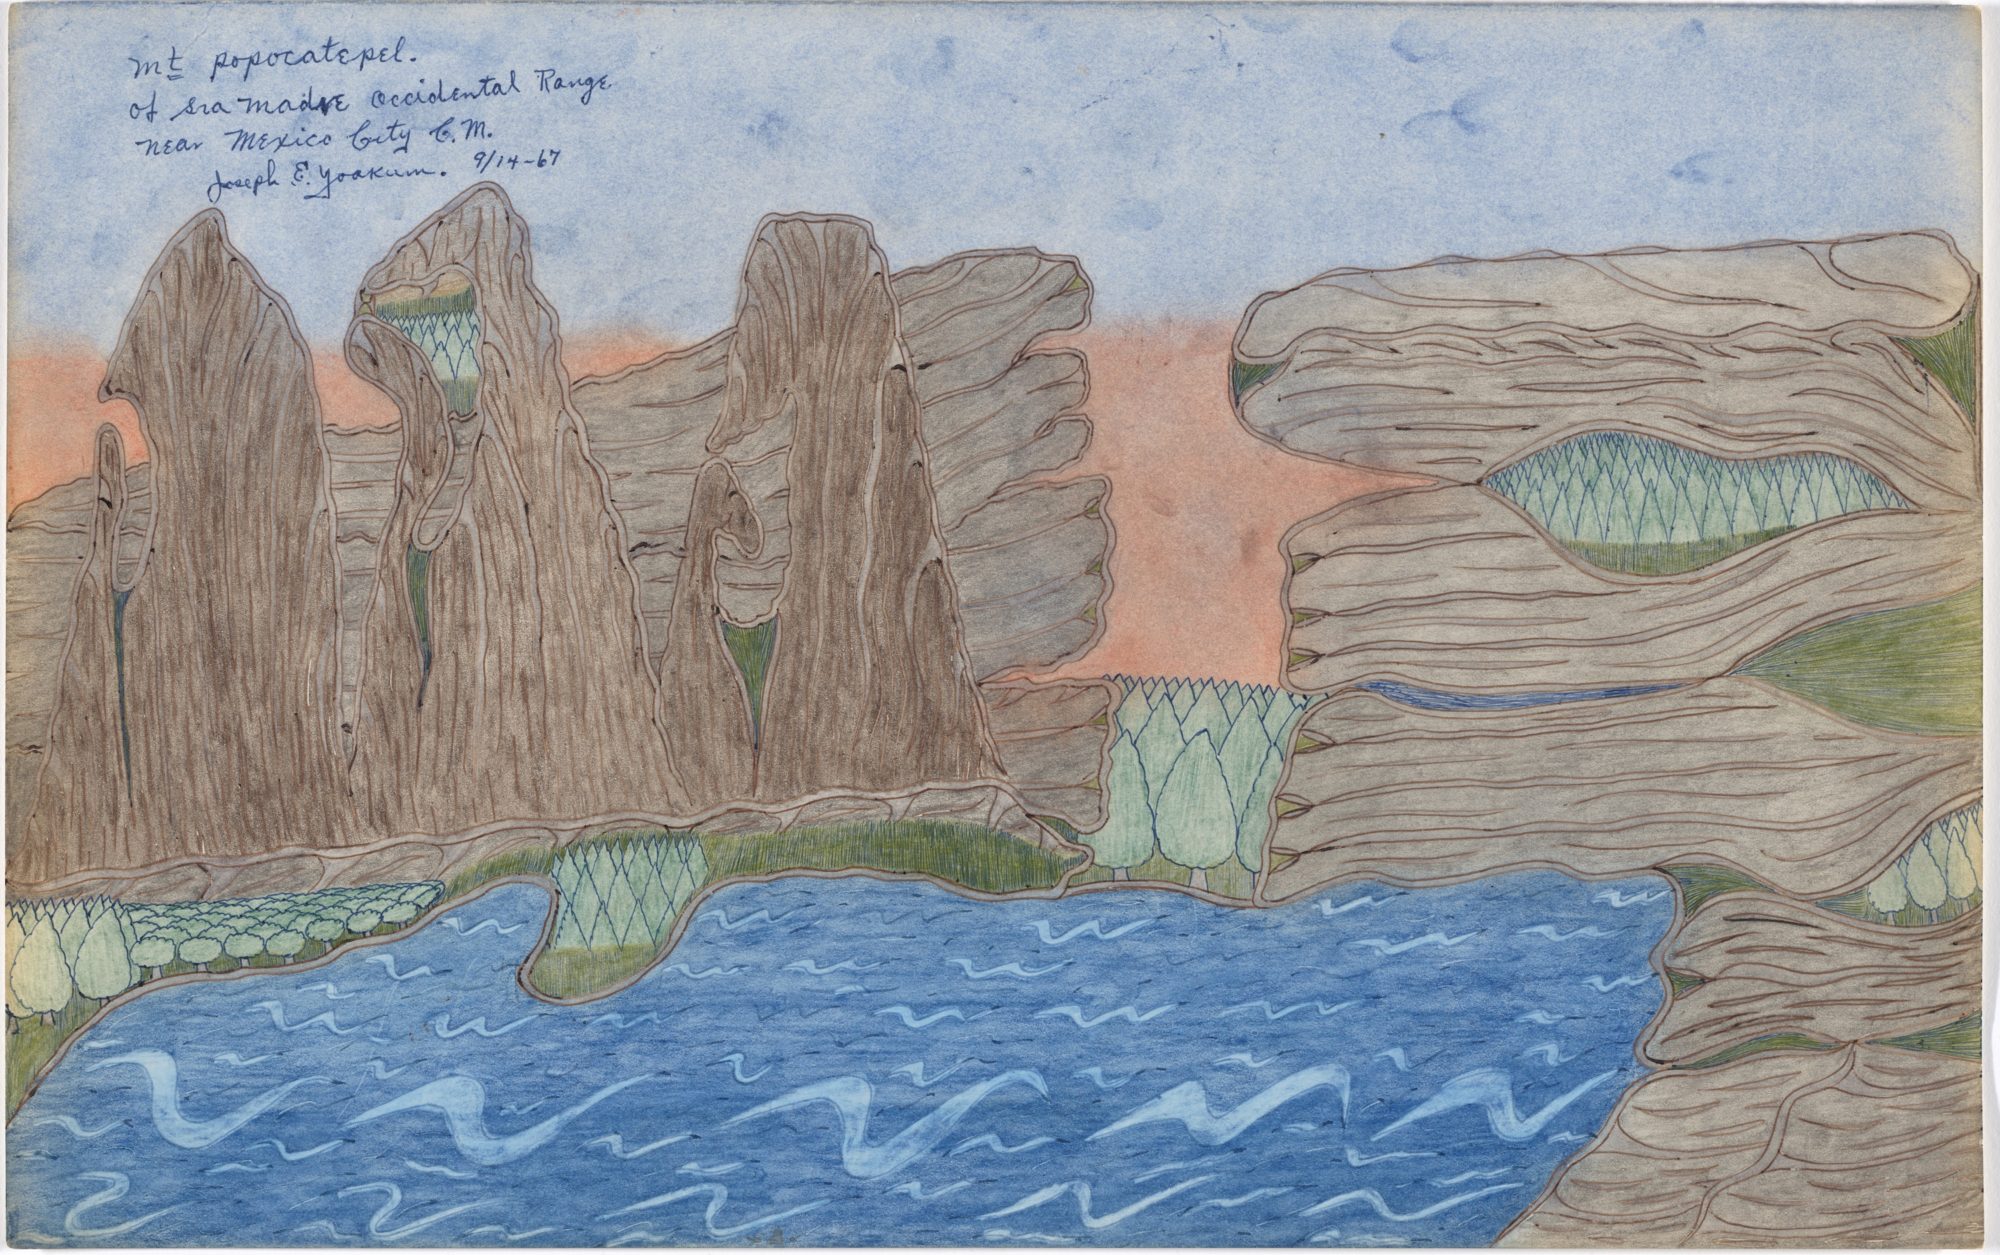 Colored-pencil drawing of a body of water, in bright blue, framed by green trees and brown mountains and cliffs. An inscription in the upper right, in ball-point pen, reads "Mt Popocatepel of Sra Madre Occidental Range Near Mexico City C.M."